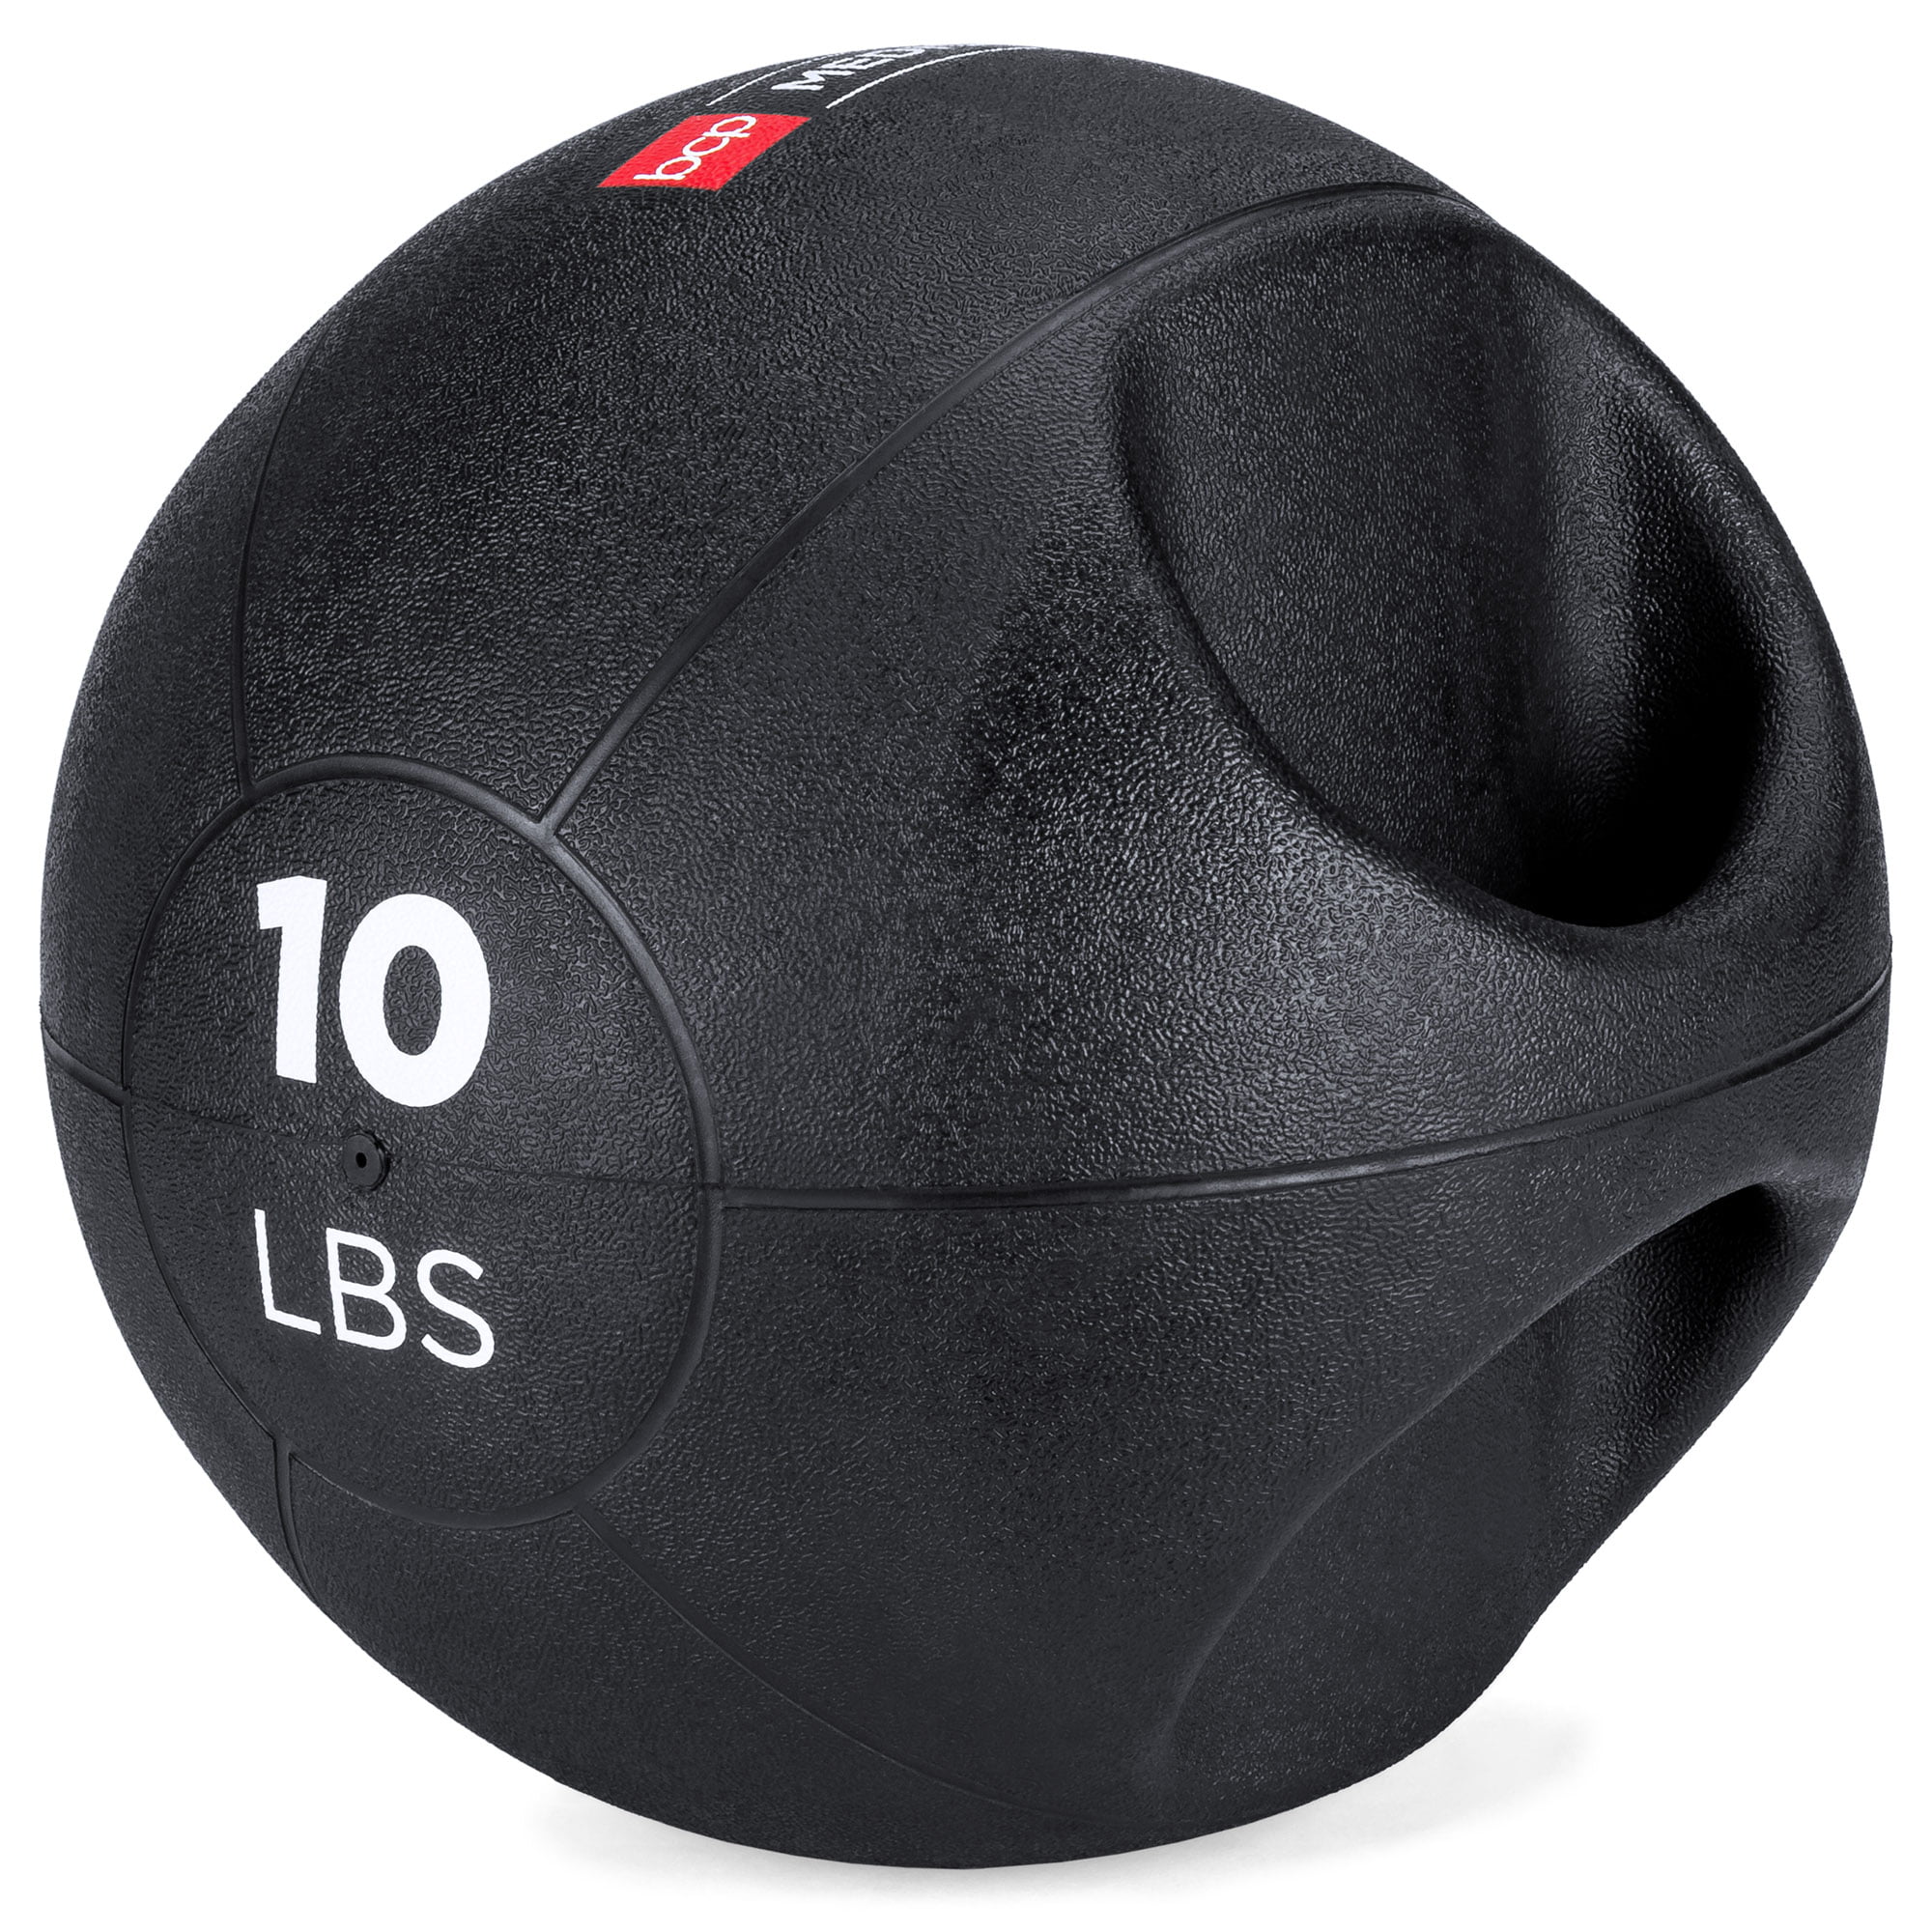 Best Choice Products 10lb DoubleGrip Weighted Medicine Ball Exercise